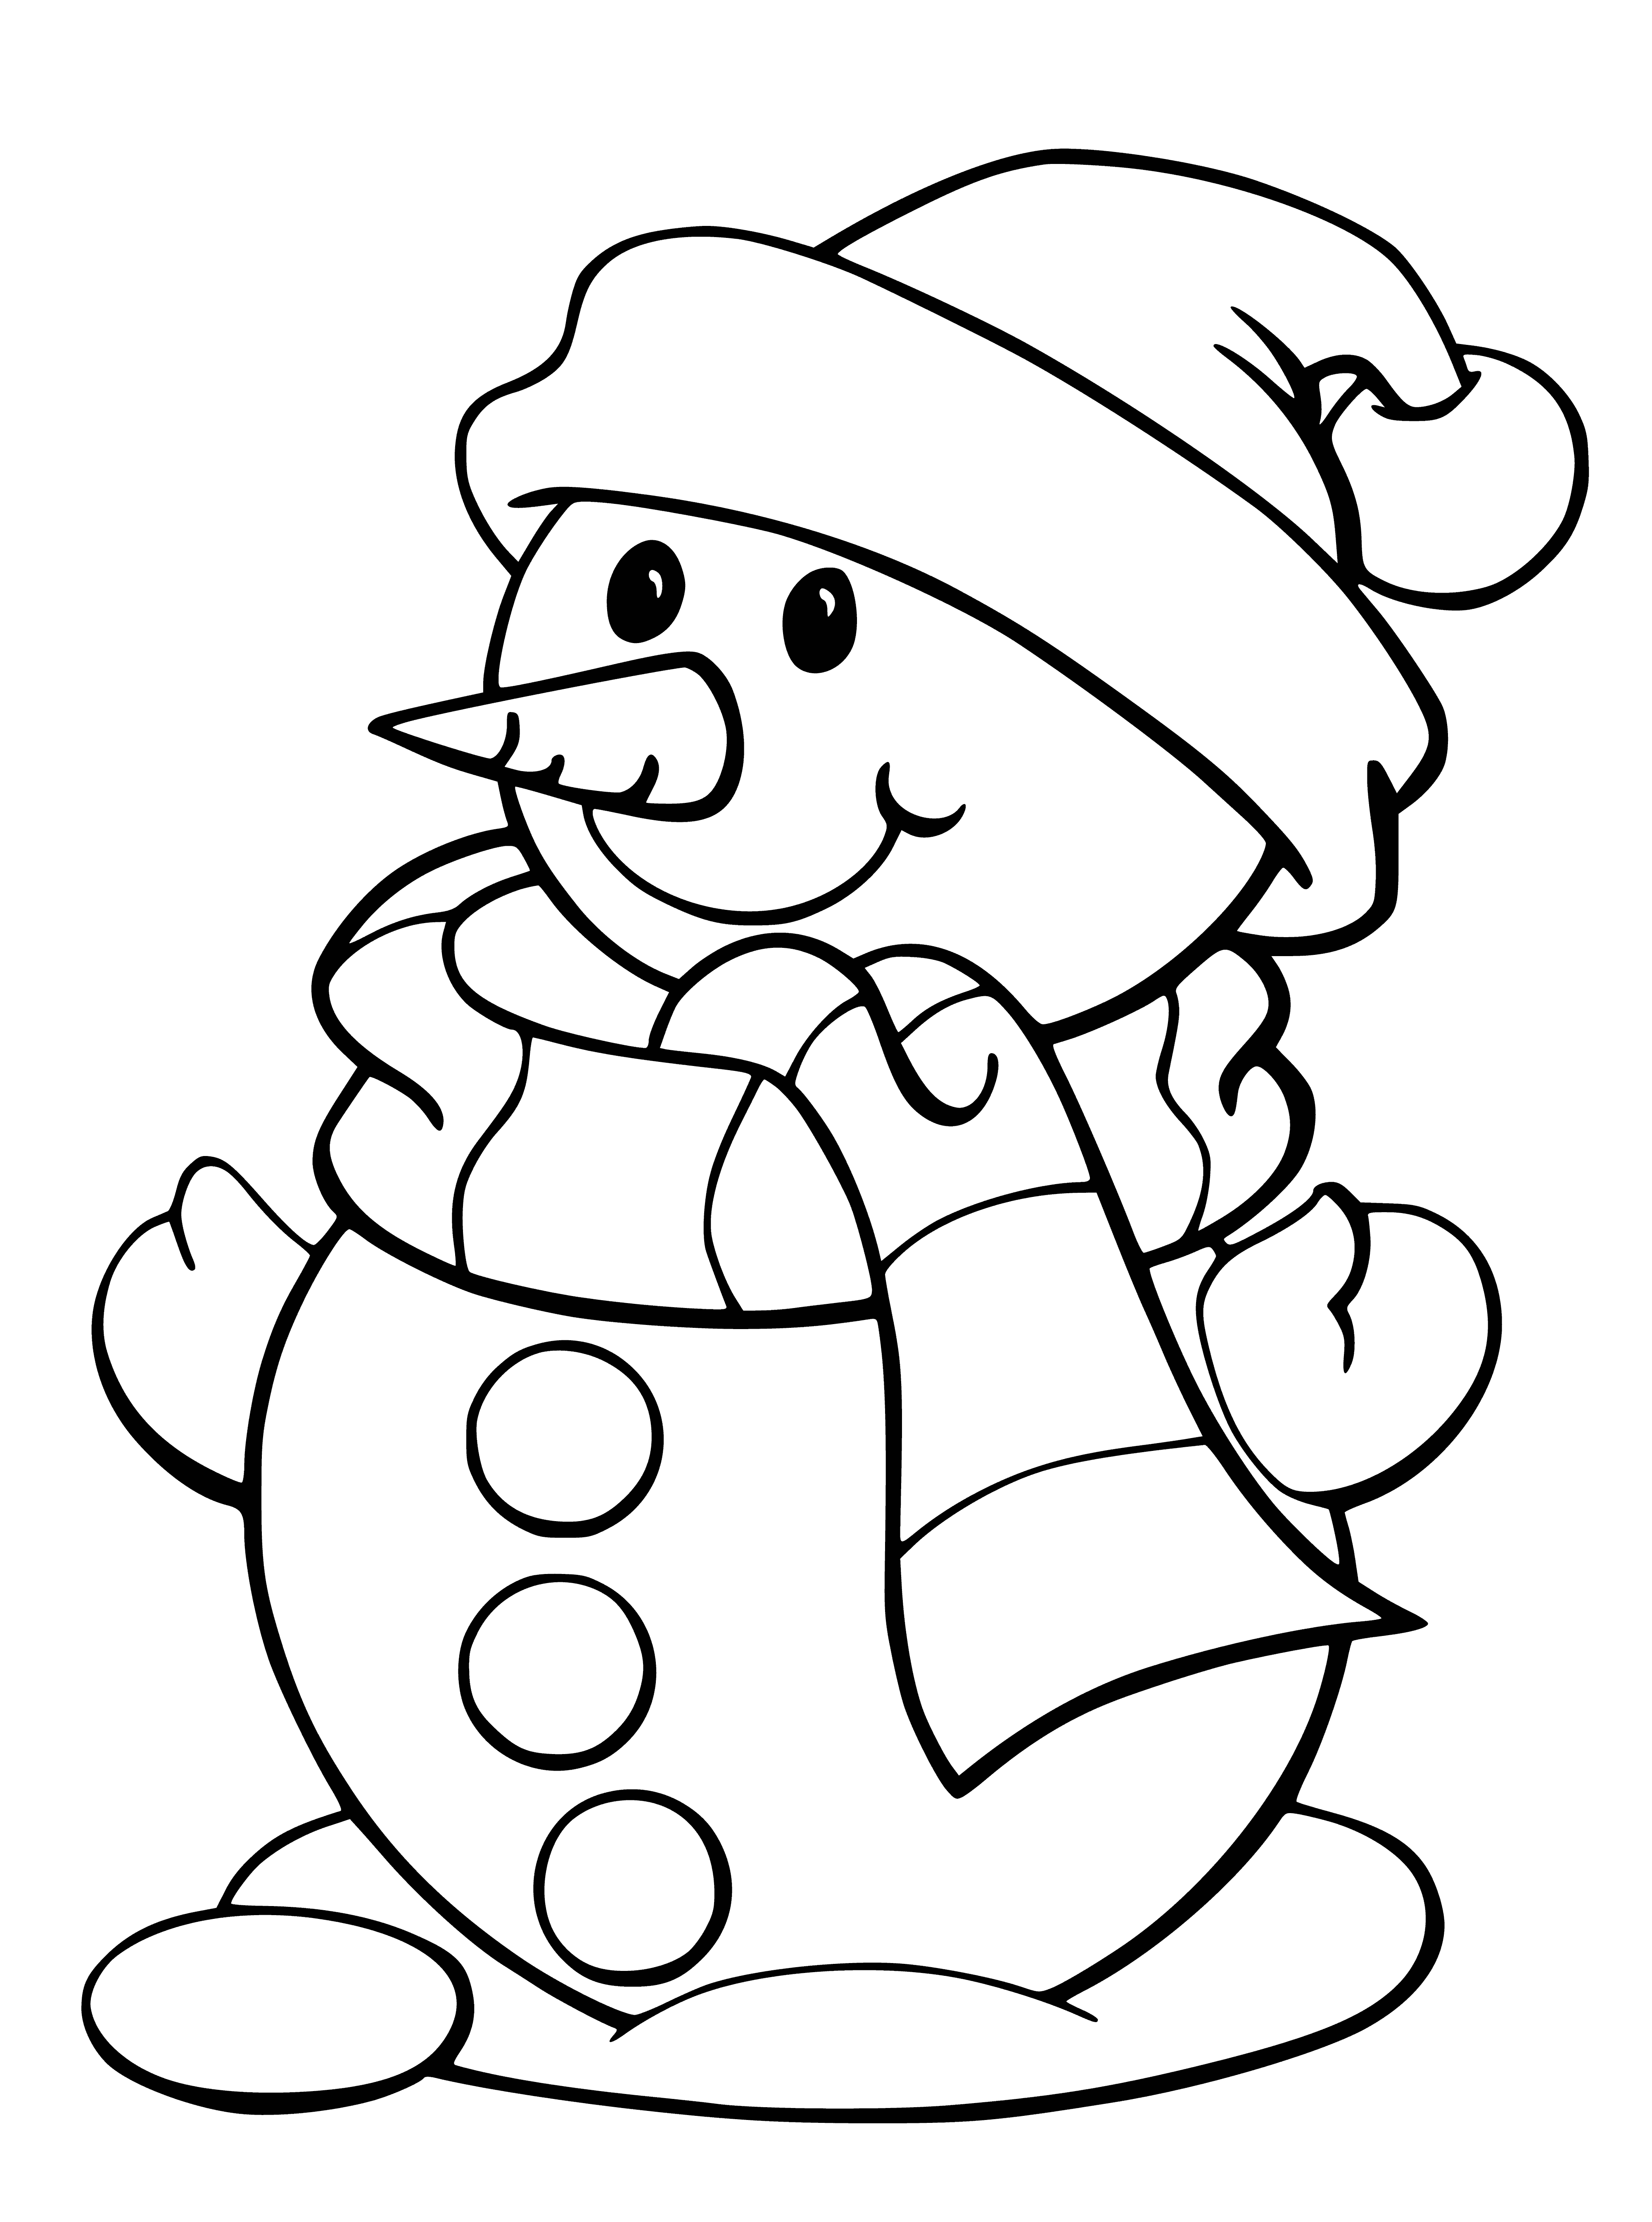 coloring page: He also has two coal eyes, a carrot nose, and a coal mouth.

A snowman with a scarf and hat, two coal eyes, carrot nose and coal mouth.